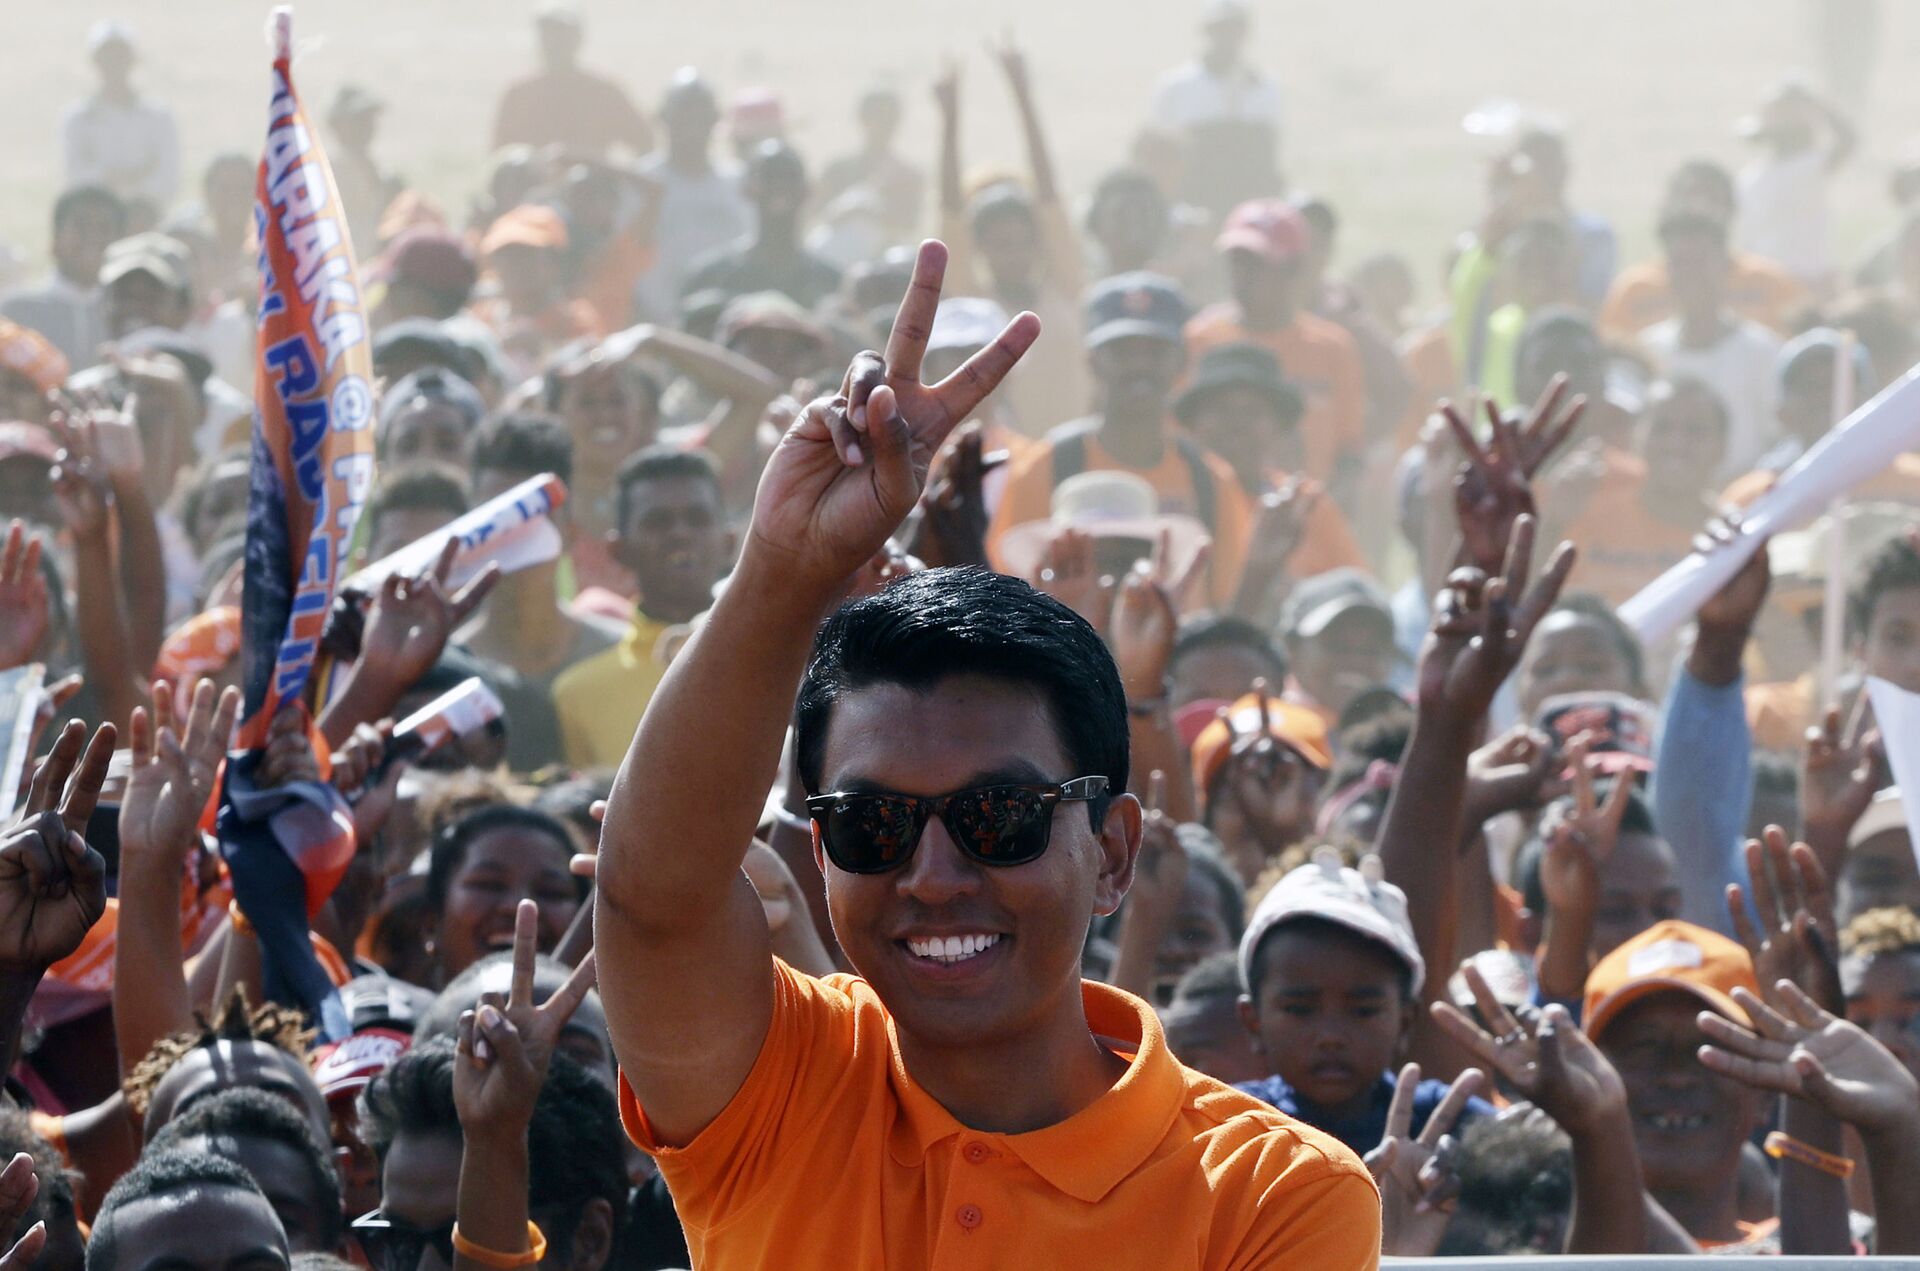 Andry Rajoelina campaigning for the presidency during the 2018 election in Madagascar - Sputnik International, 1920, 07.09.2021